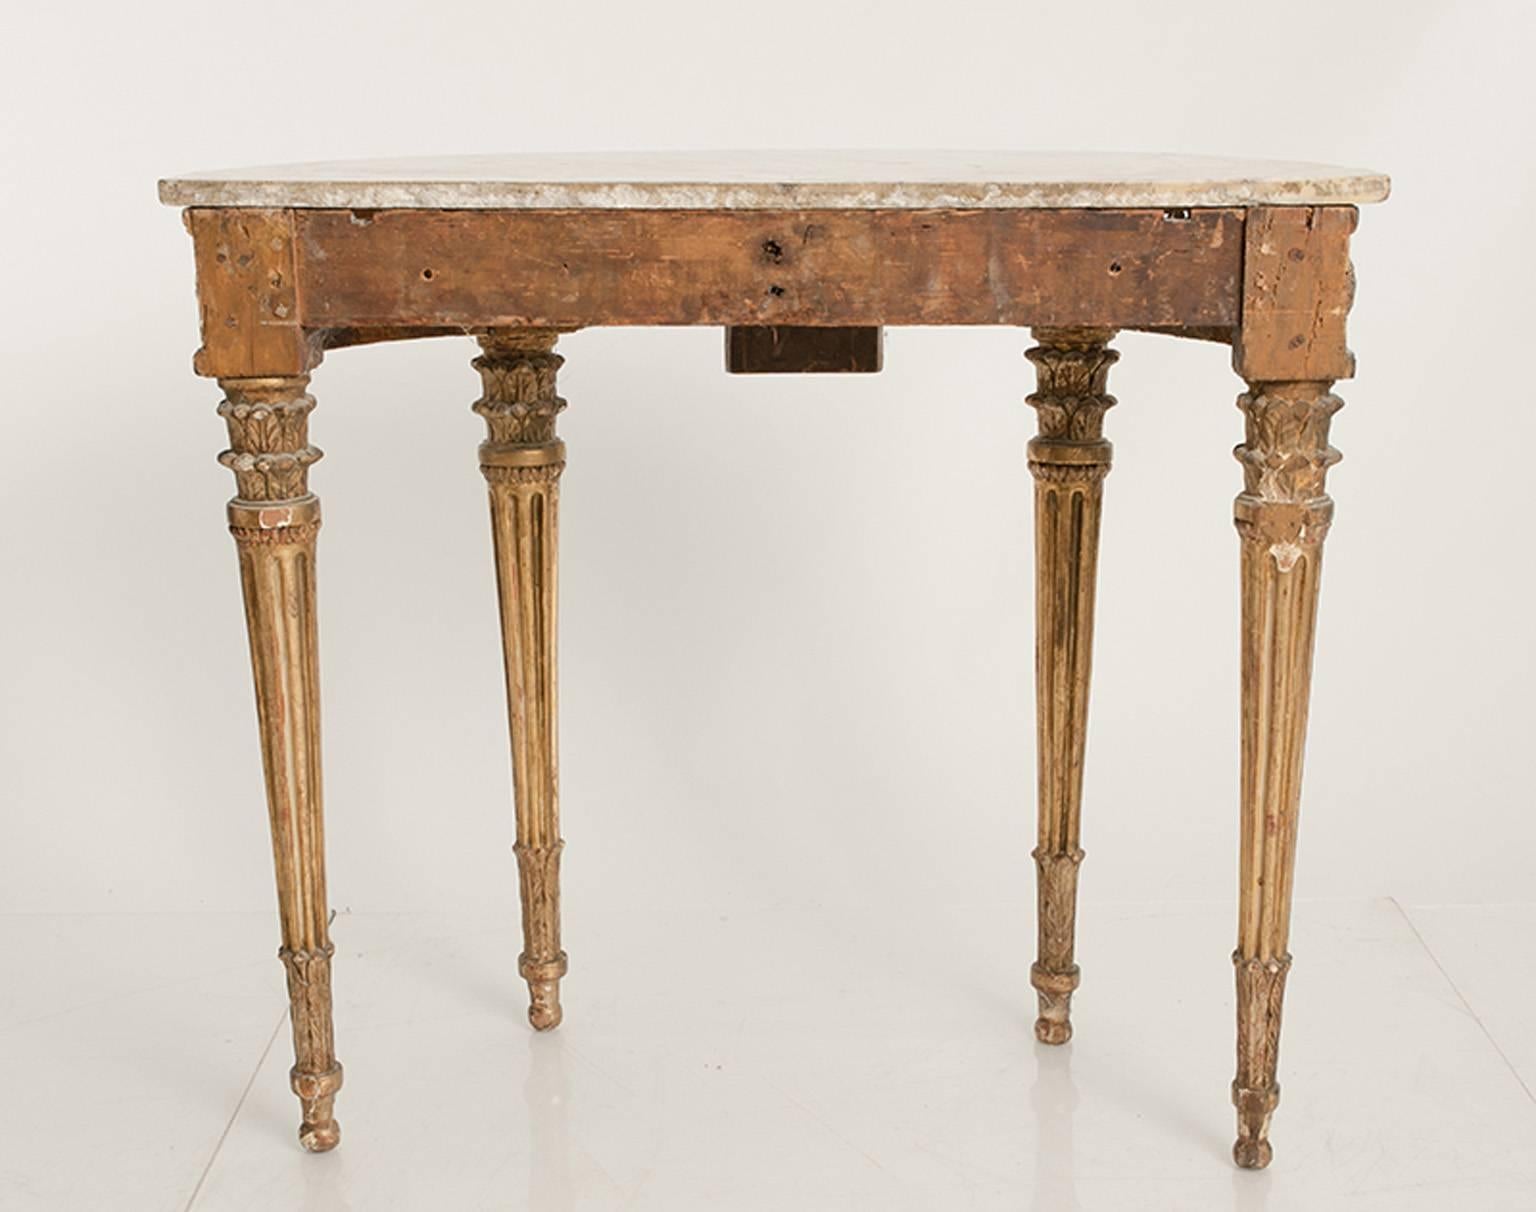 Early 18th century Italian demilune console with marble top and distressed gilding.